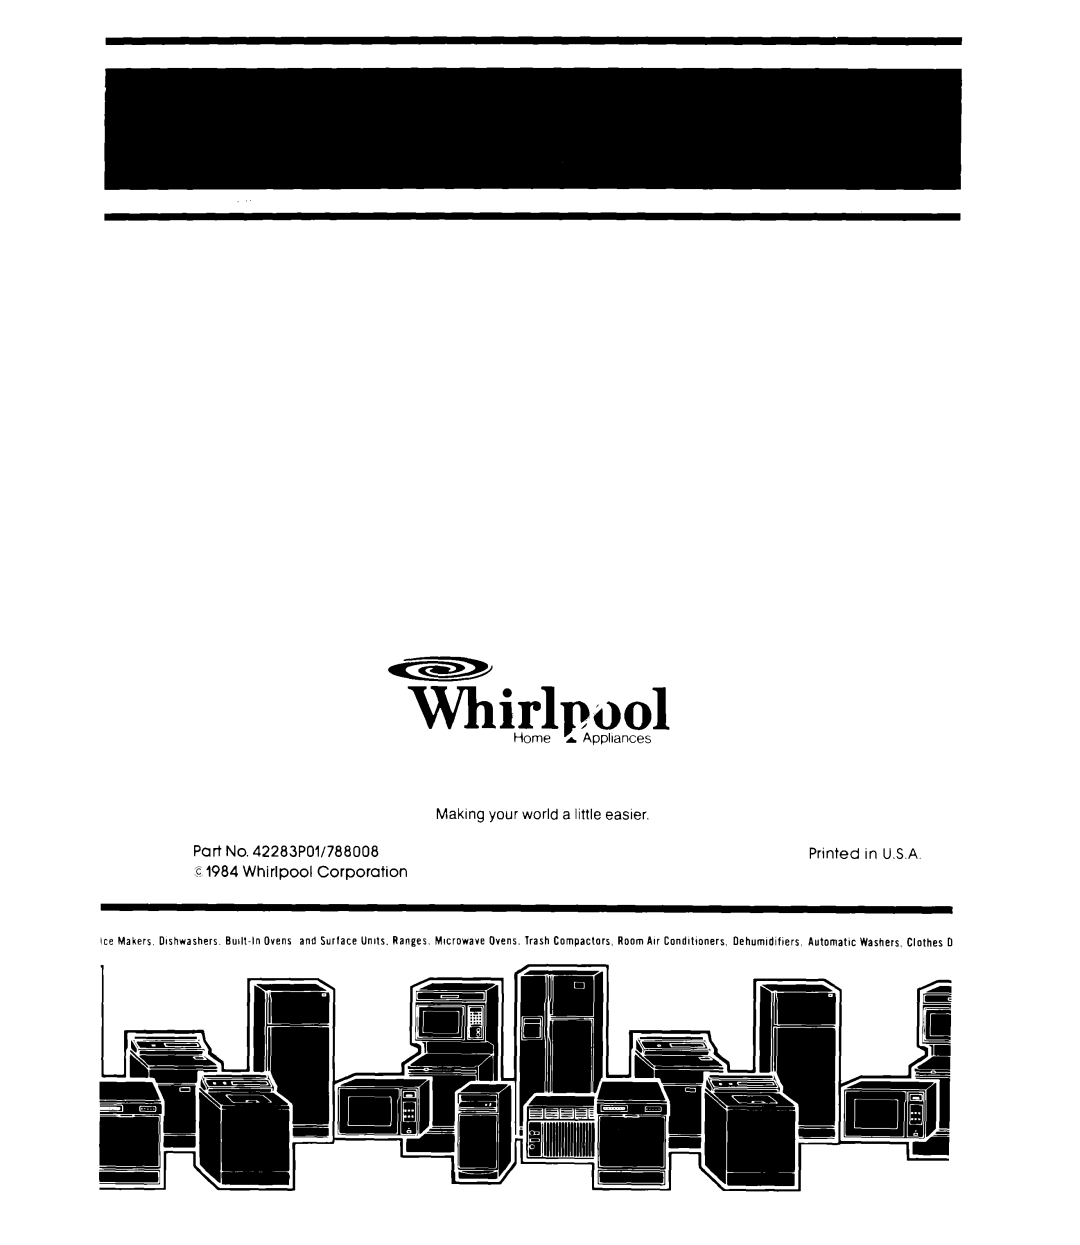 Whirlpool MW3200XM Home, Making your world a little easier, Part No. 42283POli788008, Printed, c 1984 Whirlpool, in U.S.A 